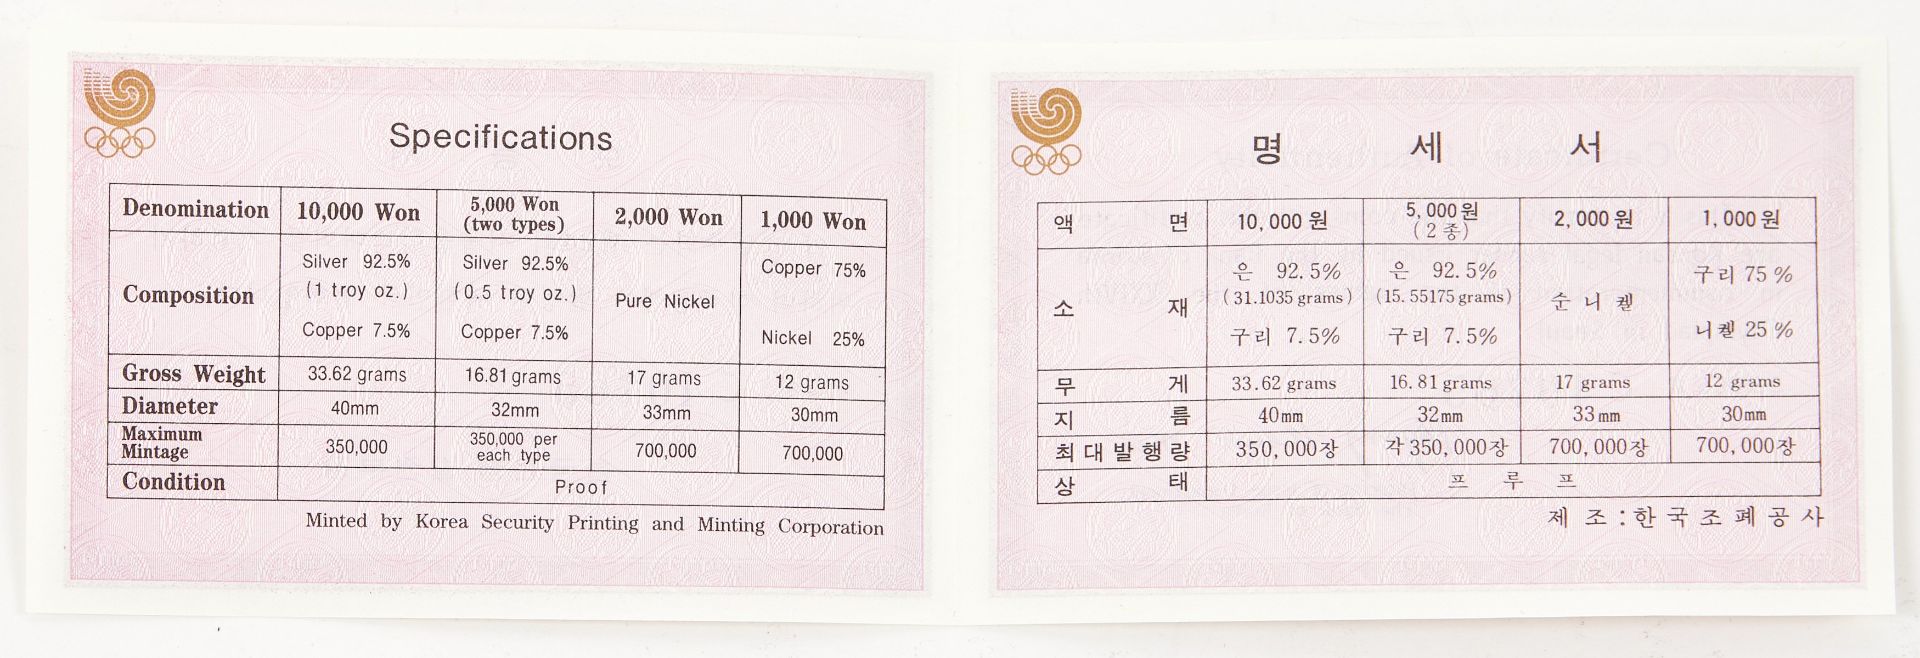 Seoul 1988 Olympic Coin Set - Image 5 of 5